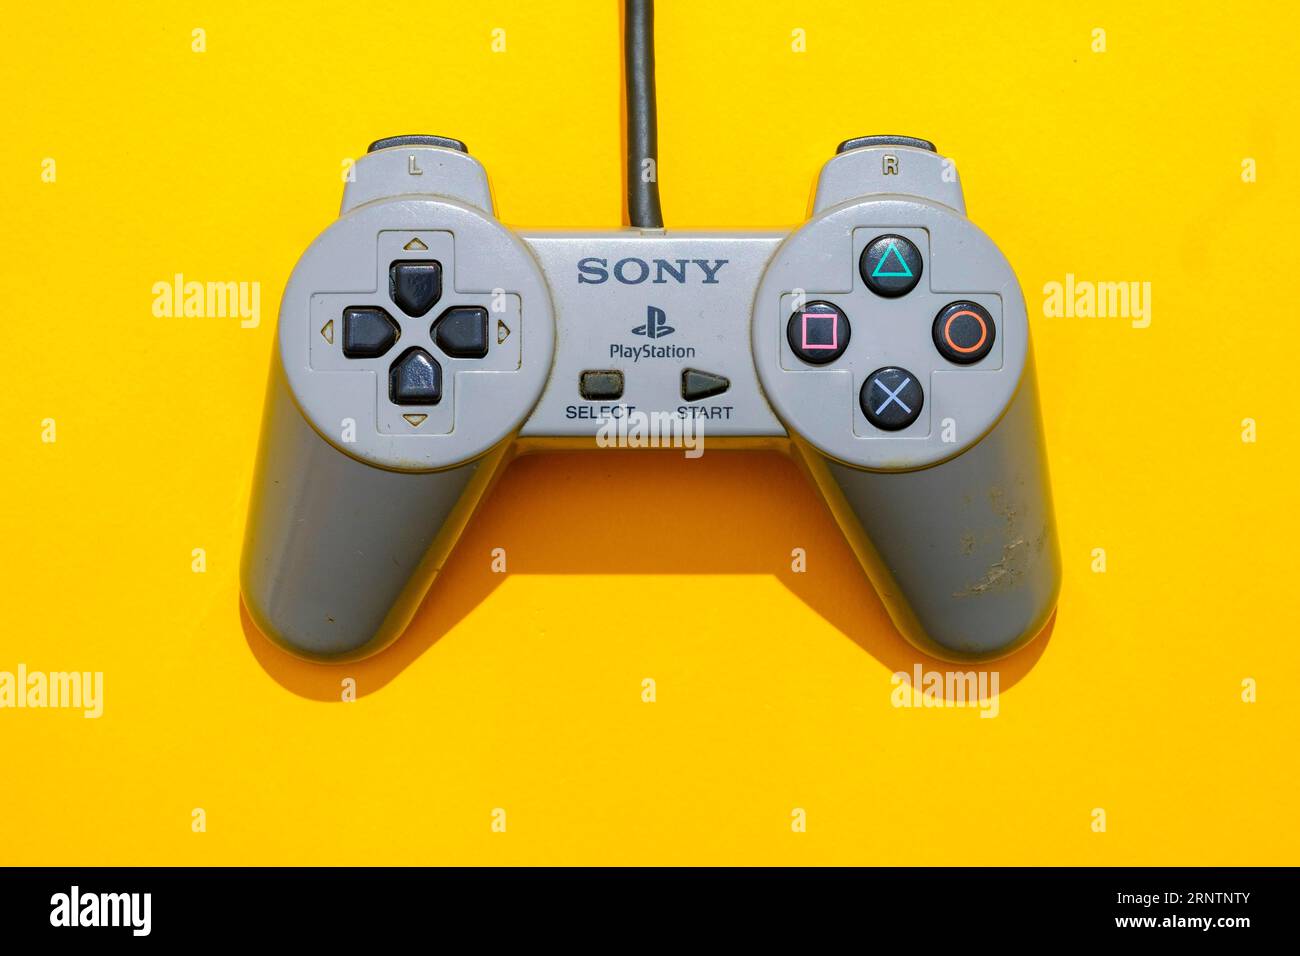 Original Sony Playstation 1 controller, top view against yellow background Stock Photo